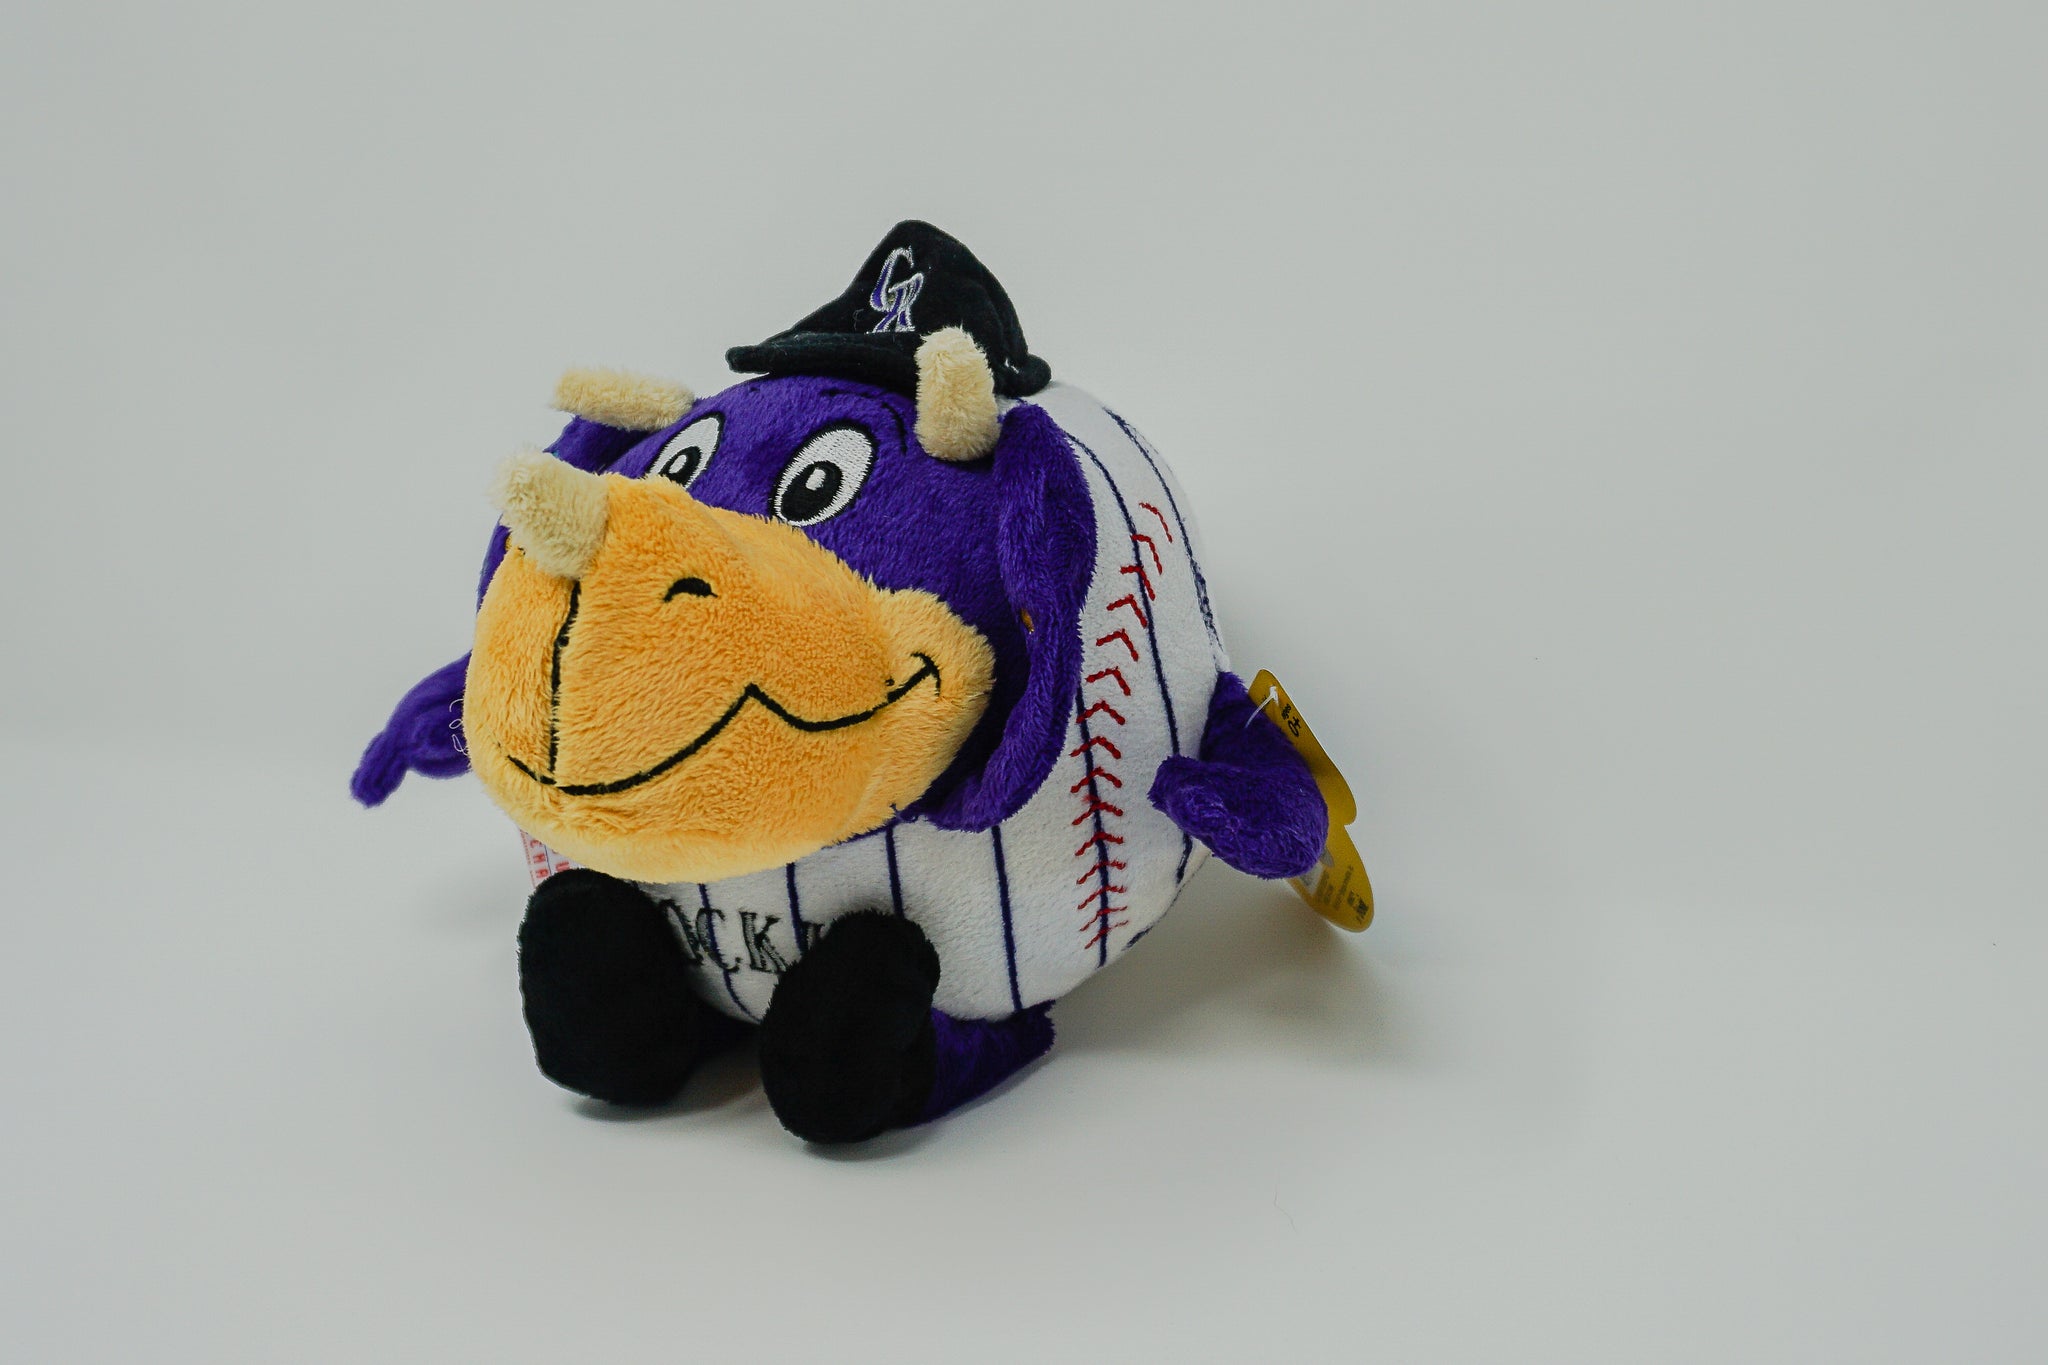 The Rockies introduced Dinger into the world out of an enormous